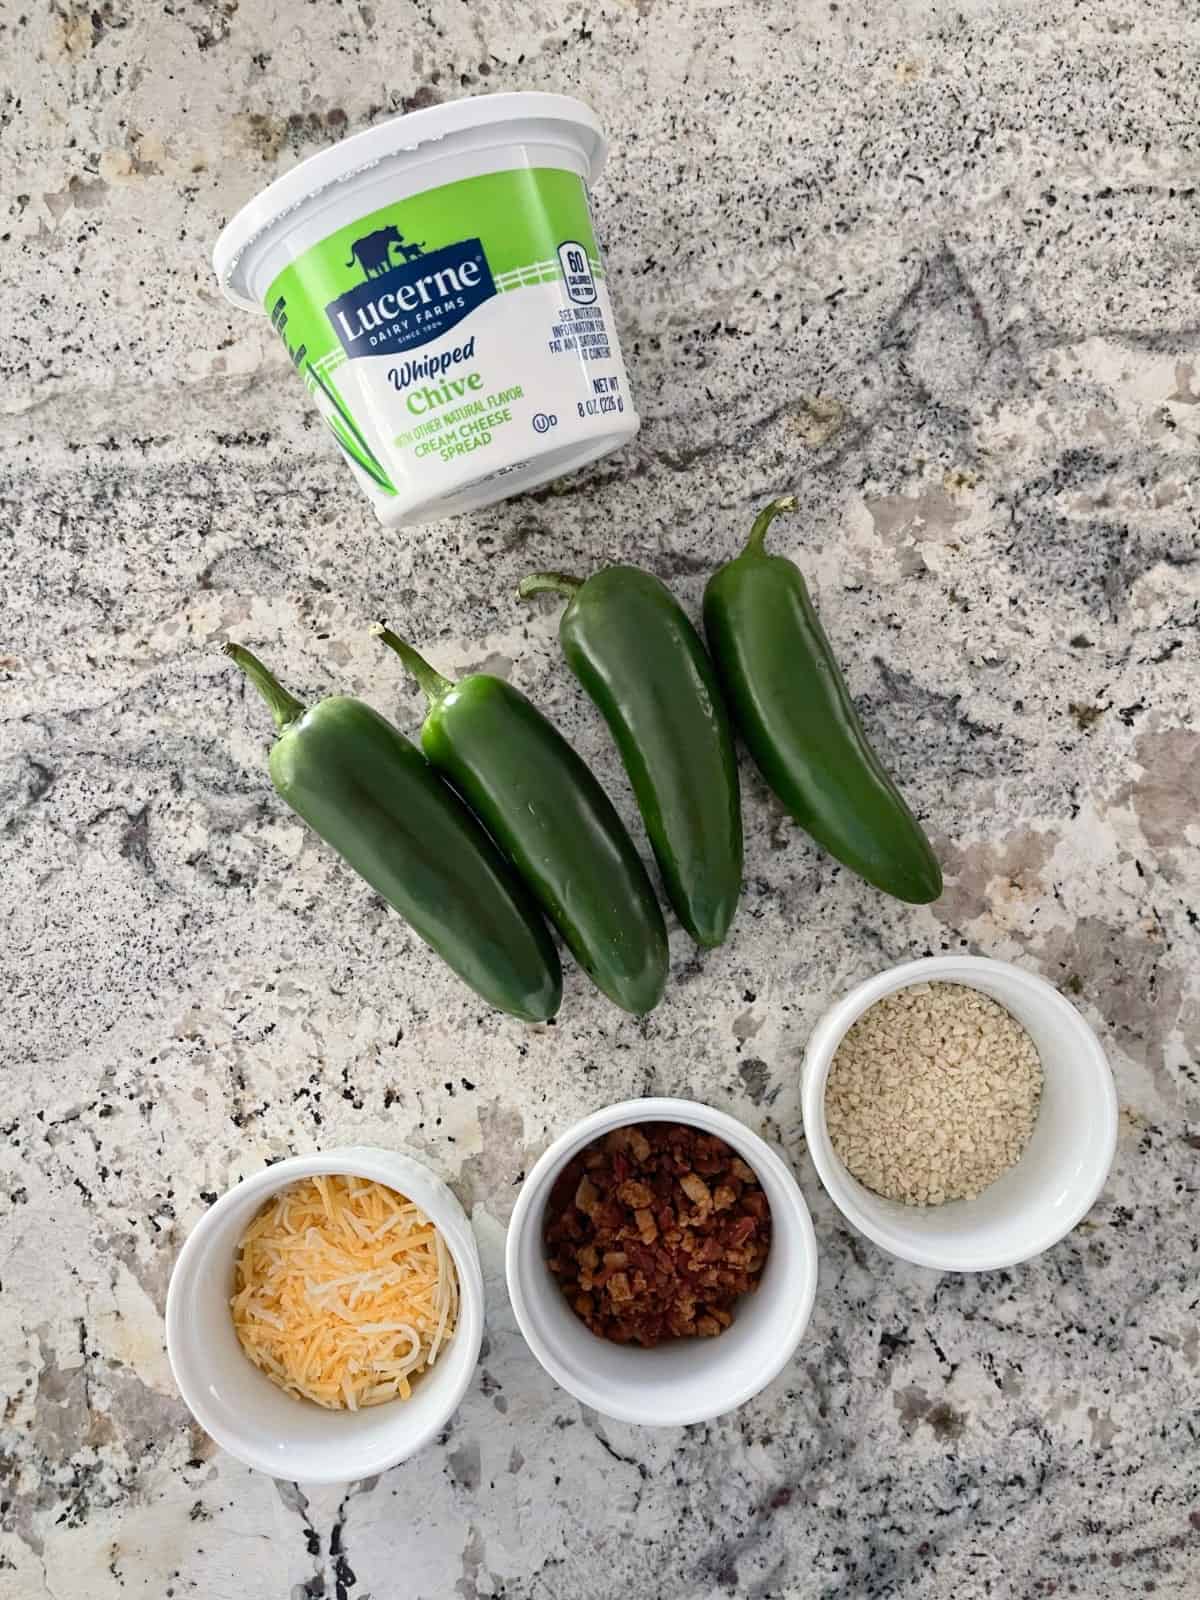 Ingredients including container of whipped cream cheese with chives, four whole jalapeno peppers, shredded cheese, bacon crumbles and panko breadcrumbs.